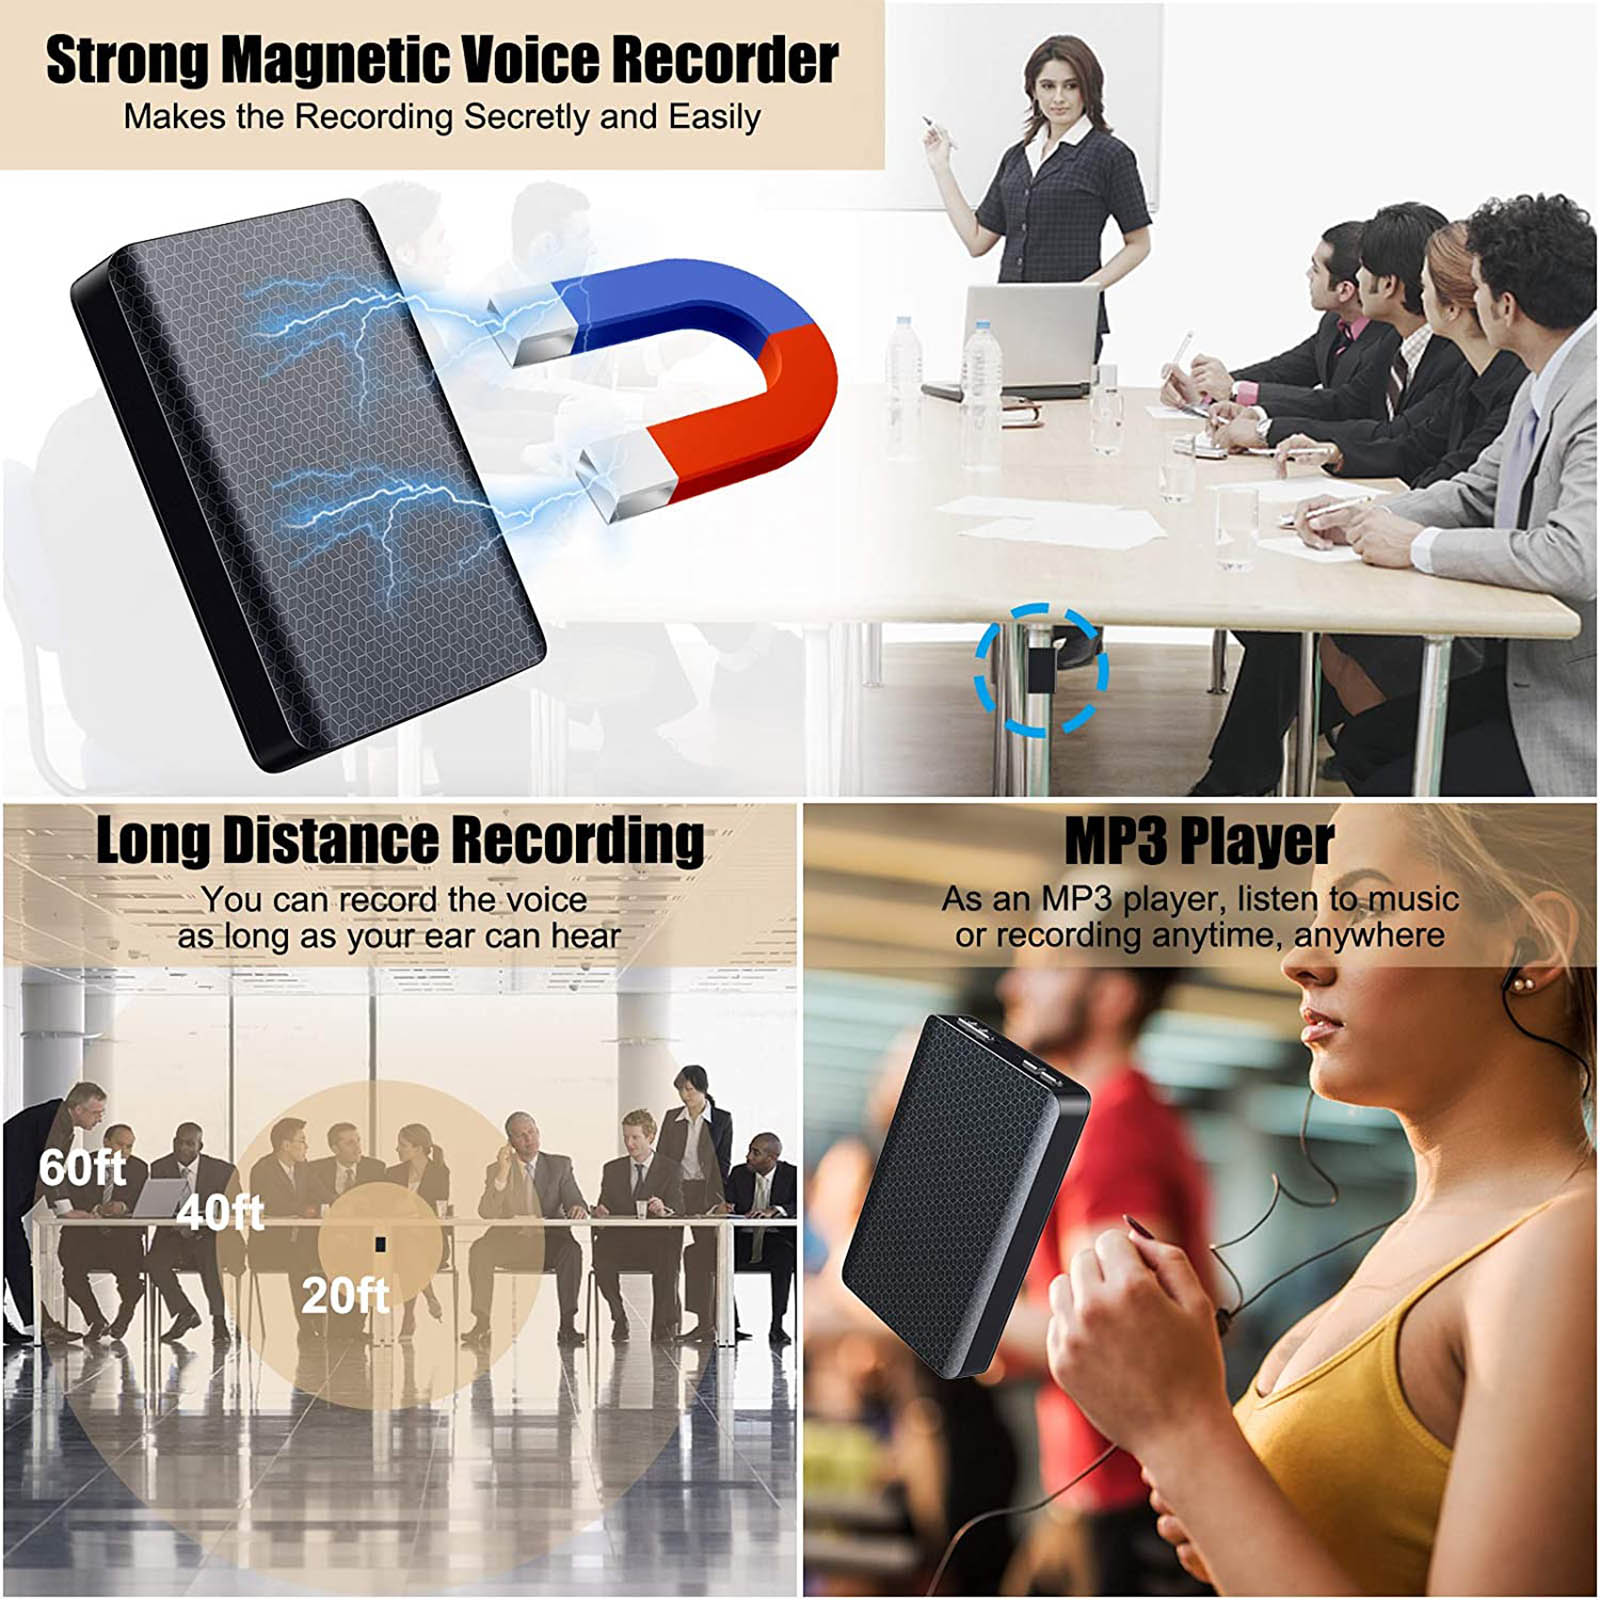 CACAGOO Q85 Mini Voice Recorder Portable Keychain Digital Voice Recorder Rectangle Dictaphone USB Audio Sound Recorder Magnetic Voice Activated Recorder Audio Recorder MP3 Recording Device for Meeti - image 5 of 7